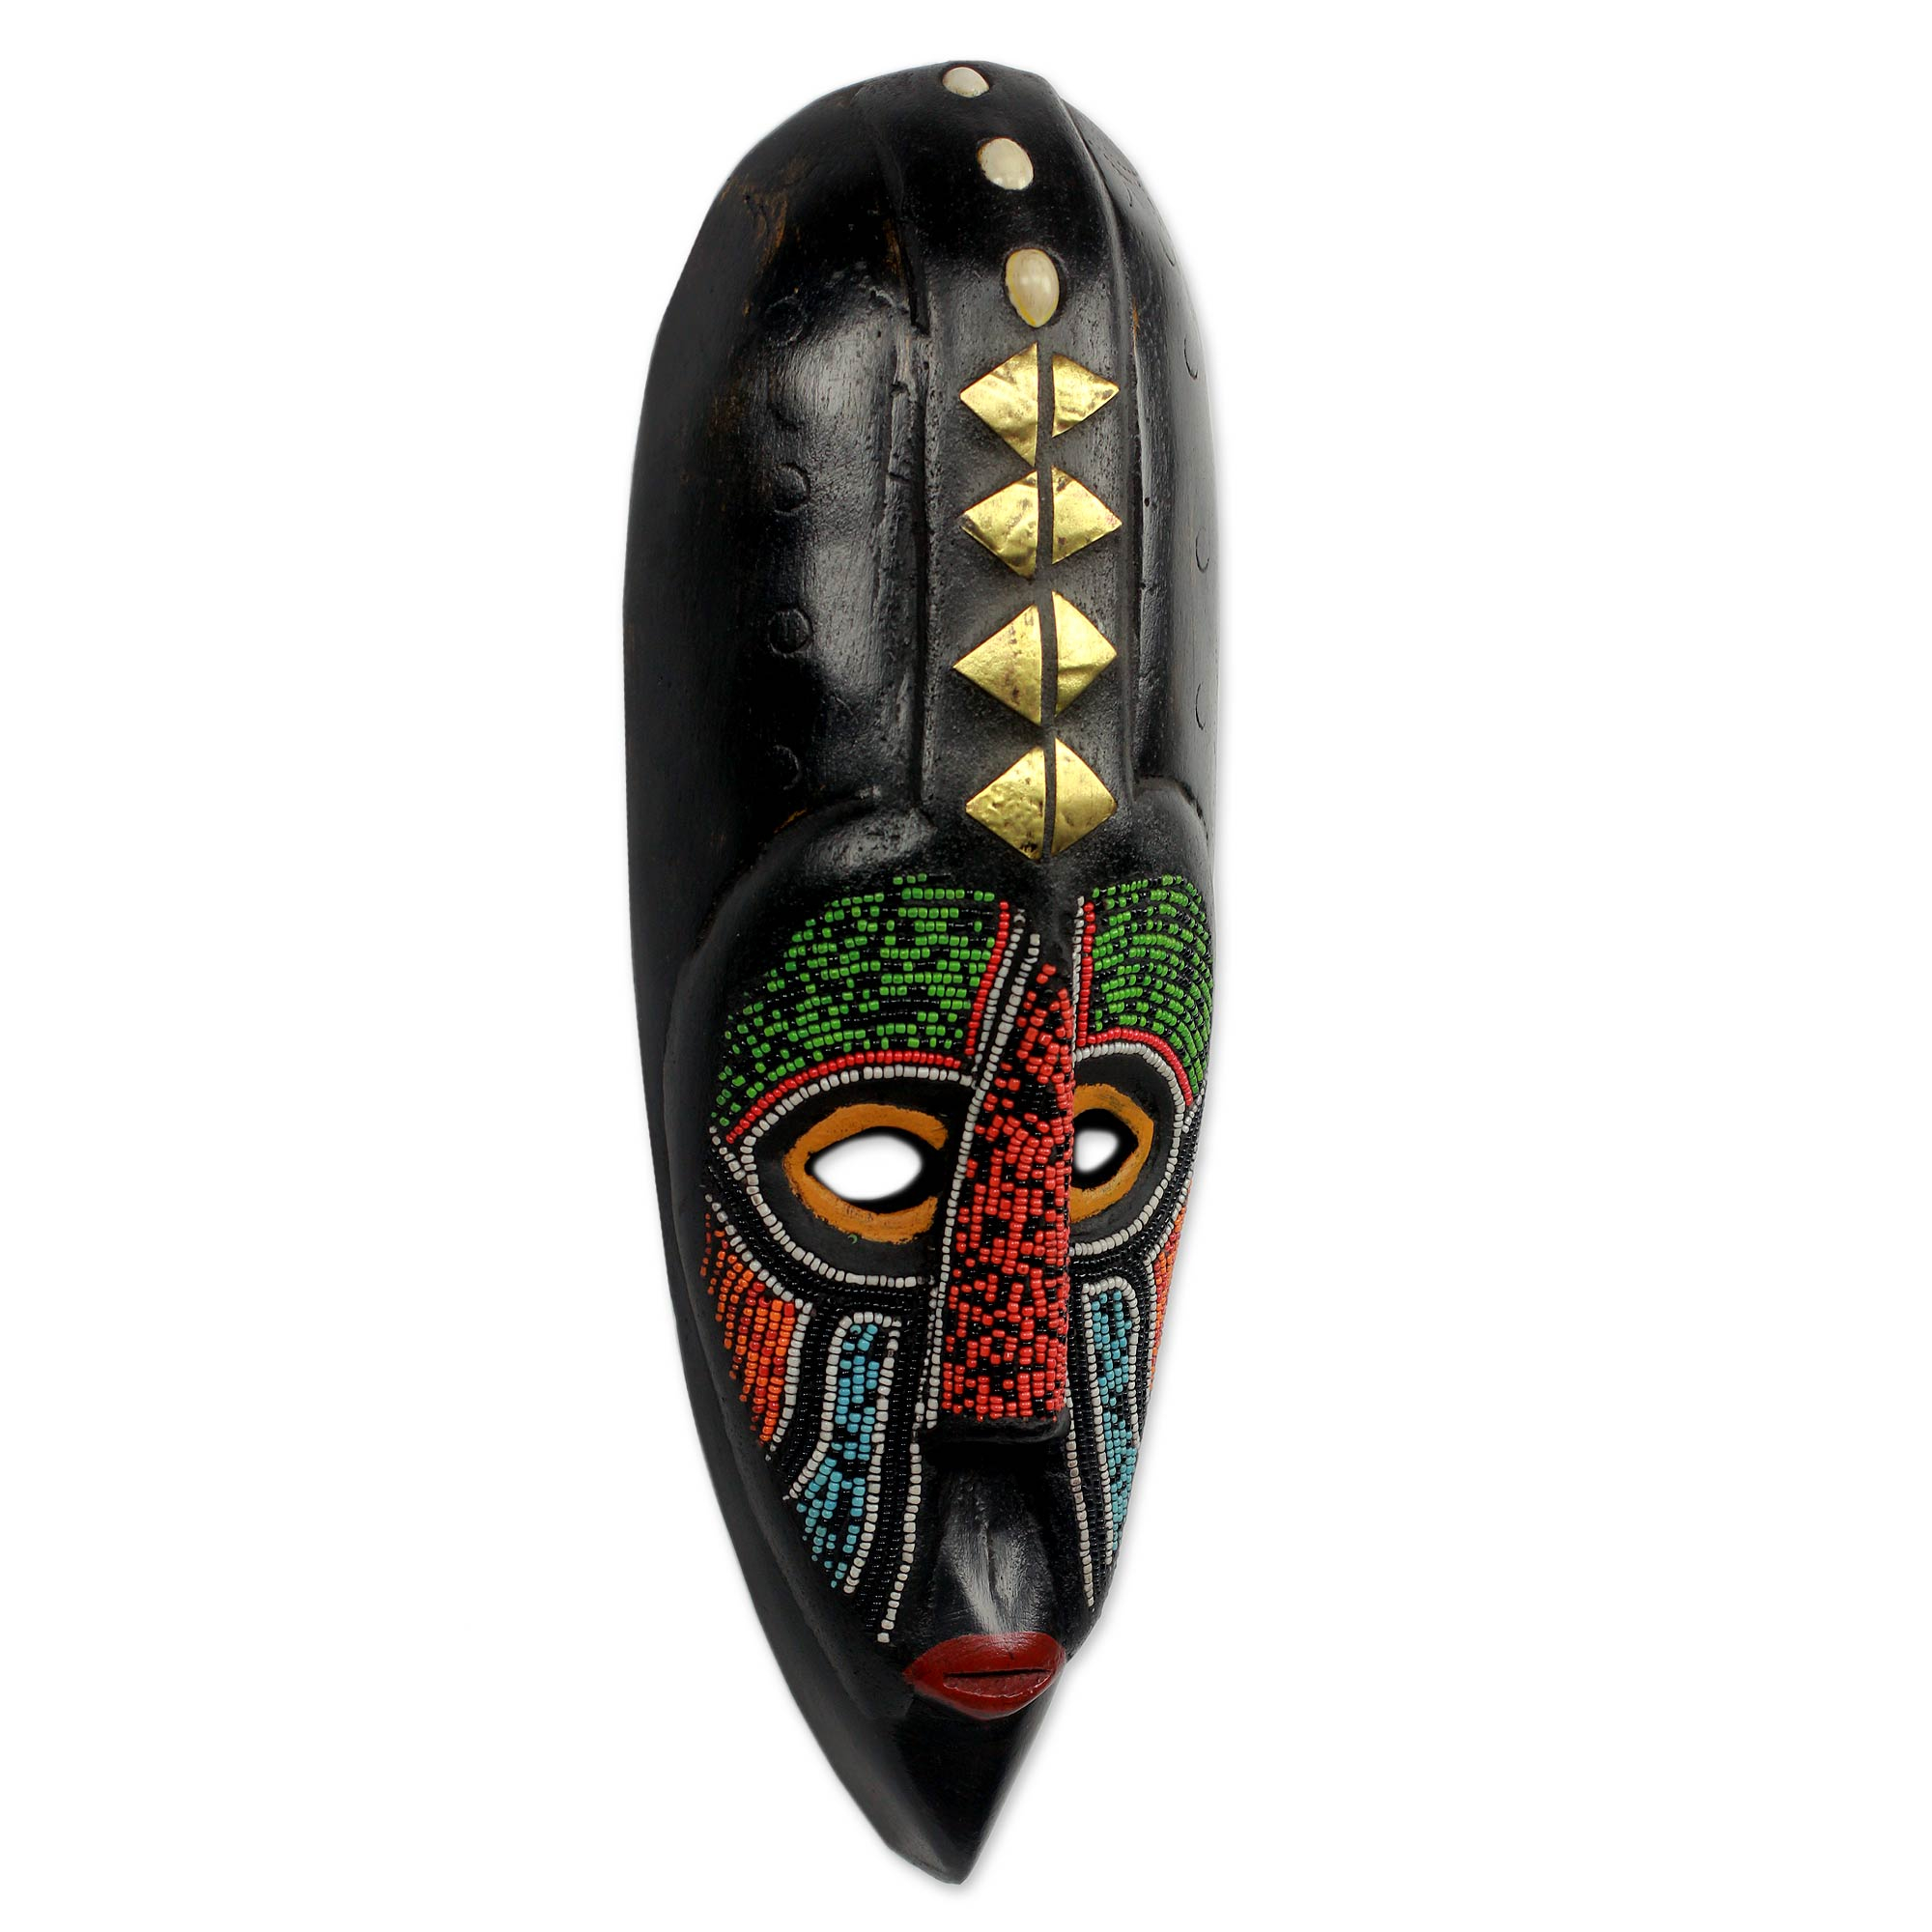 Handcrafted Beaded African Mask from Ghana - Akan Authority | NOVICA